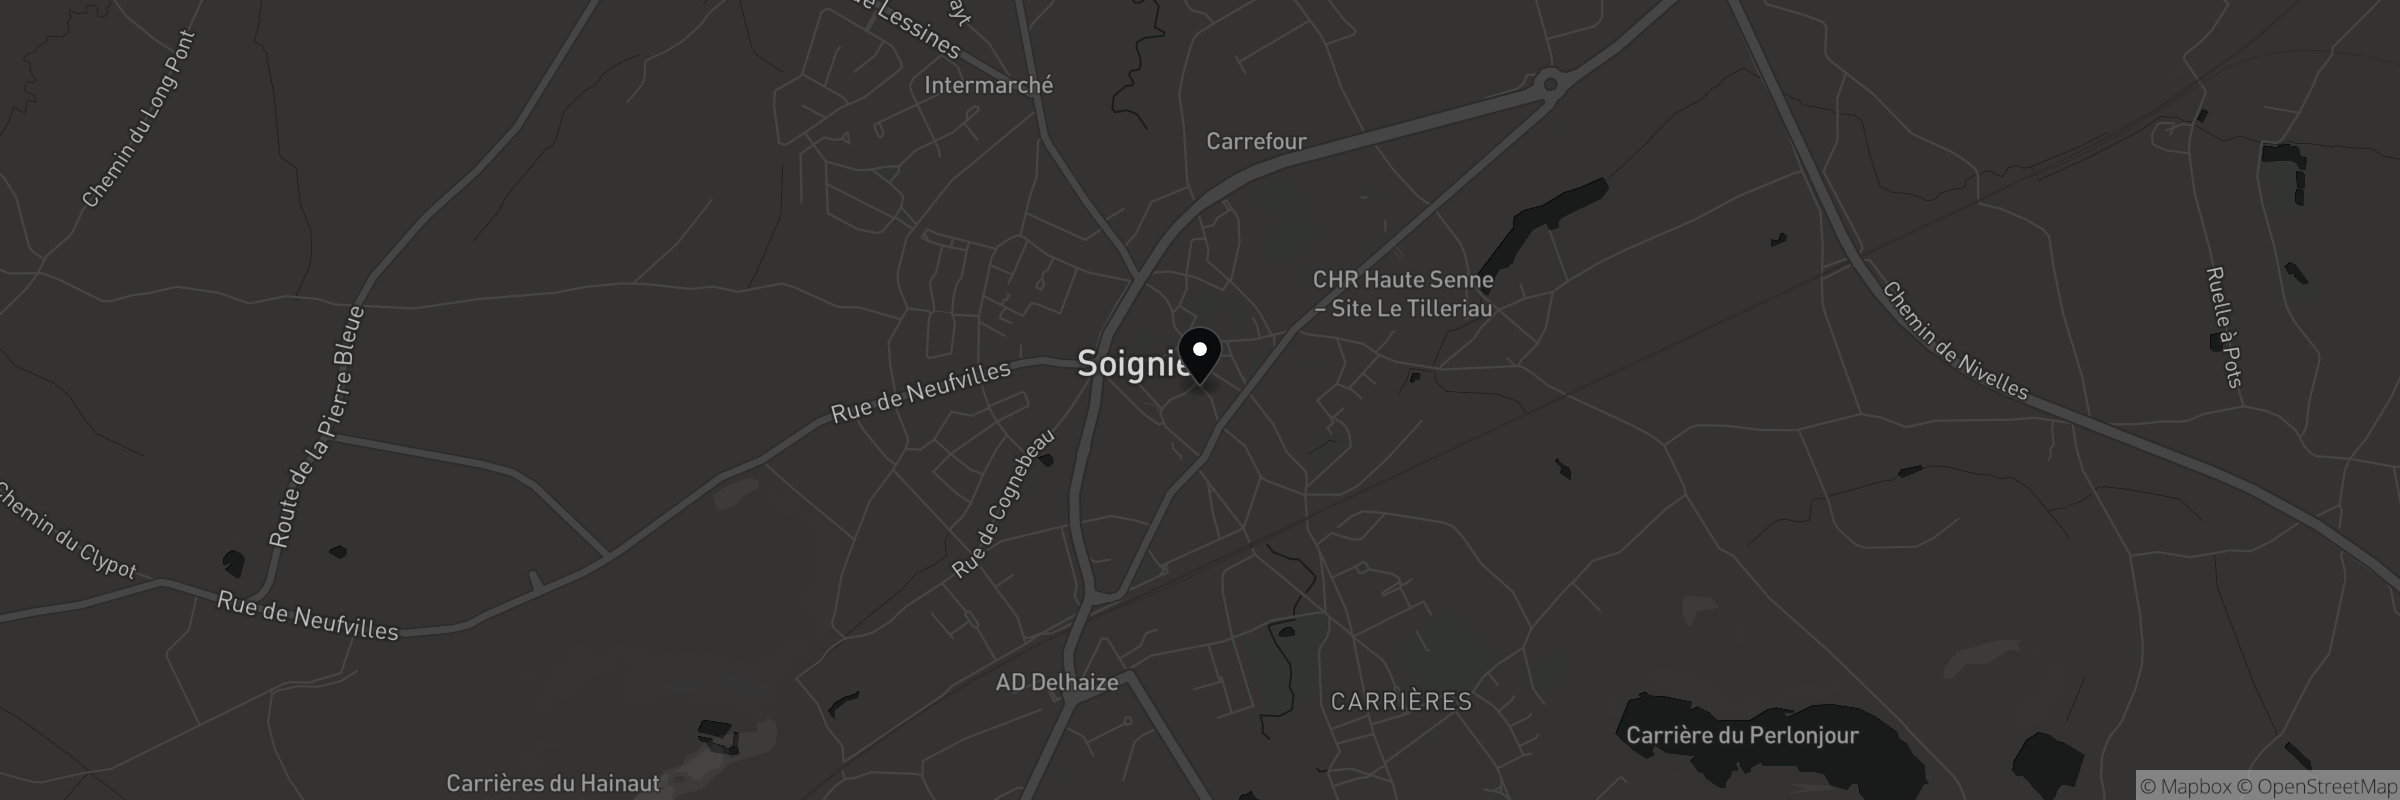 Map showing the address of Soignies